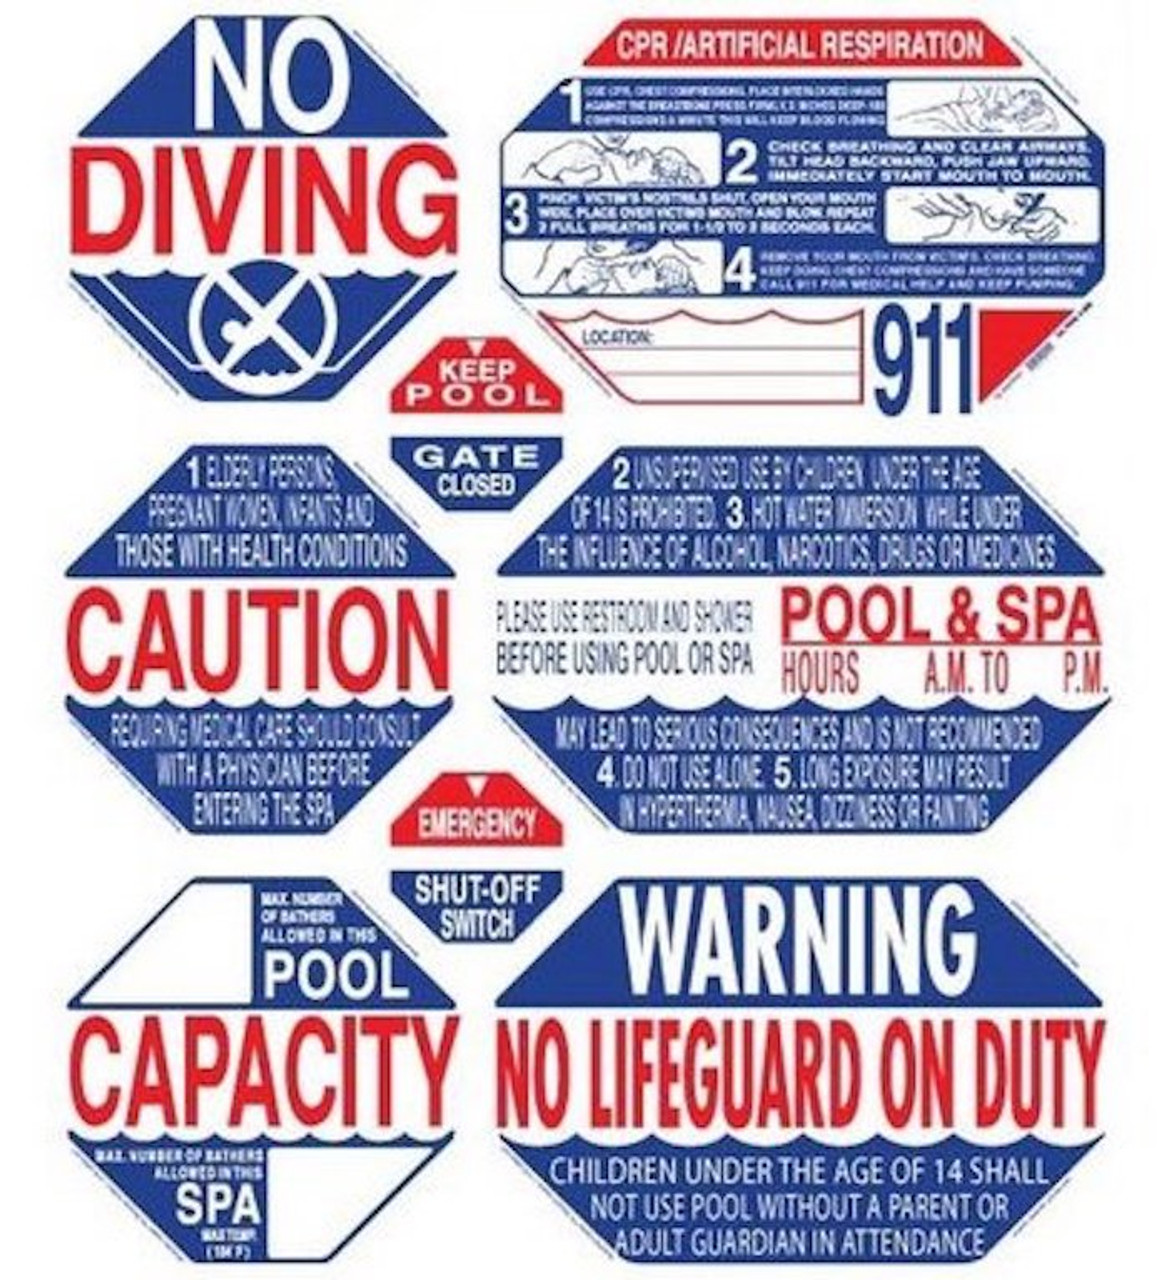 40"X48" 8-IN-1 CA POOL & SPA SIGN